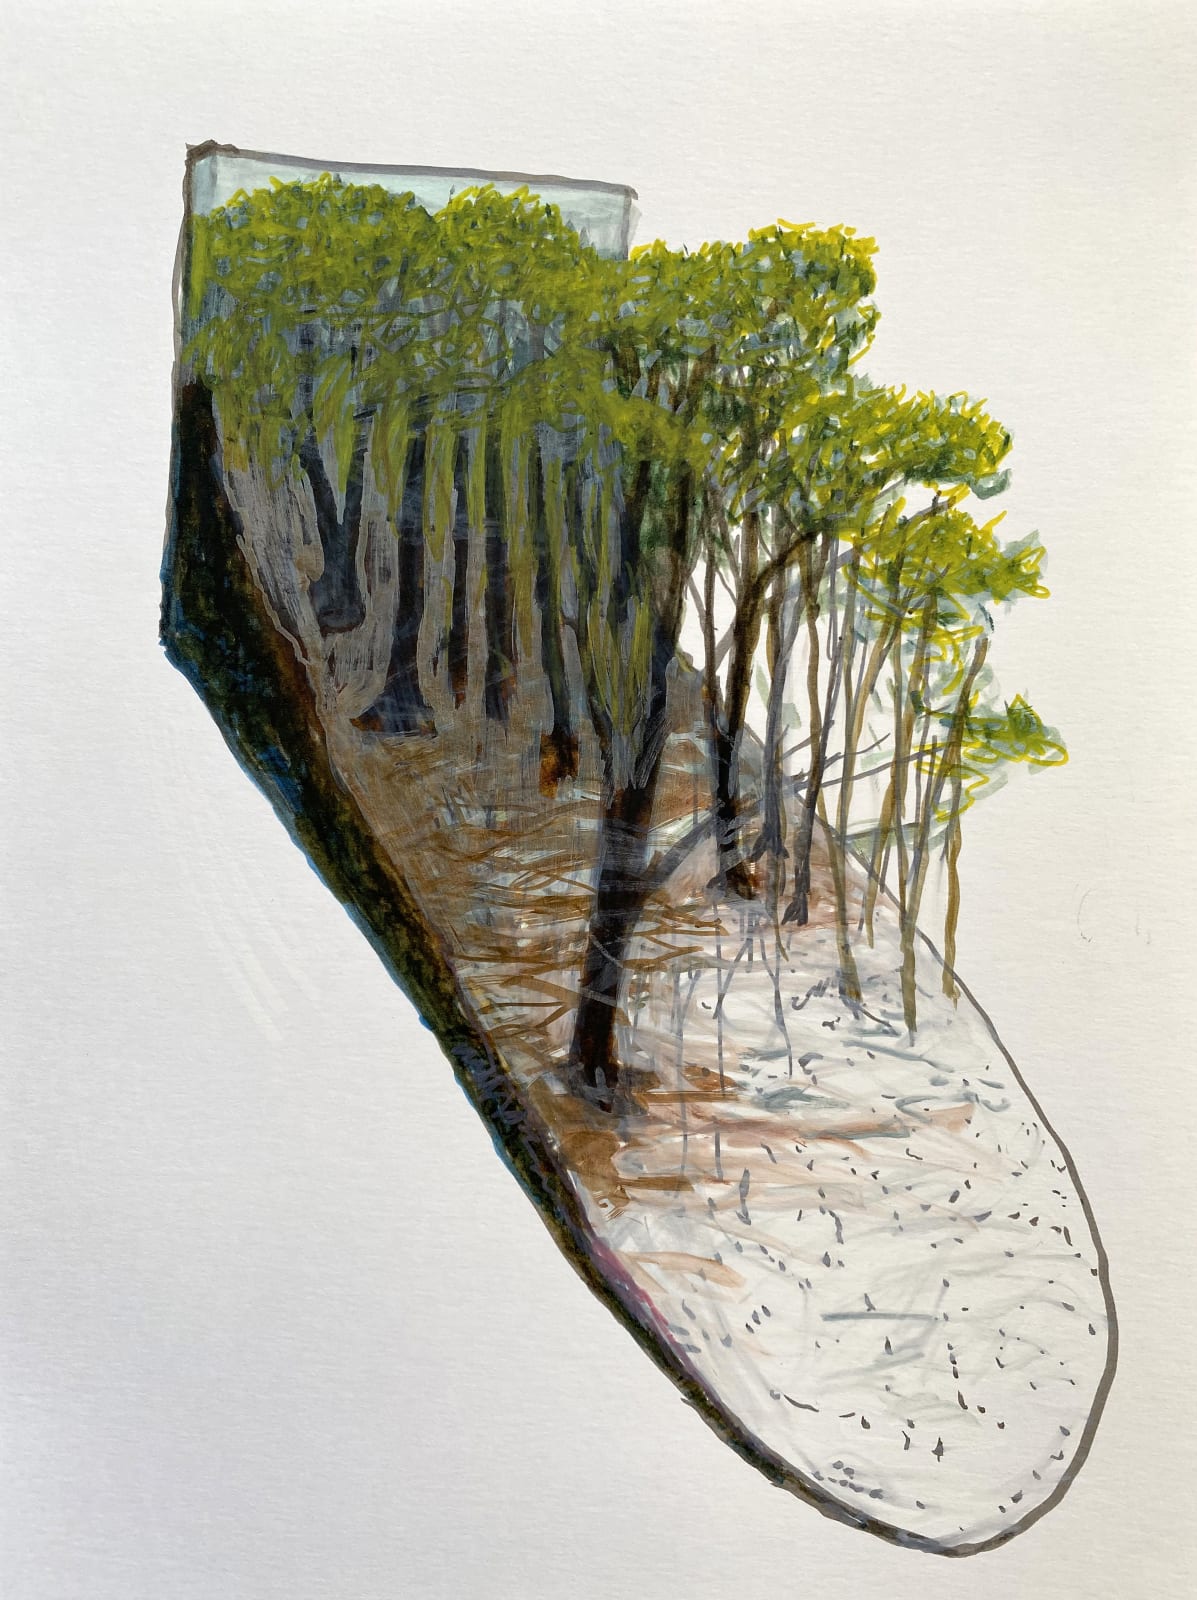 Barry Hazard, Forest Through the Trees, 2019